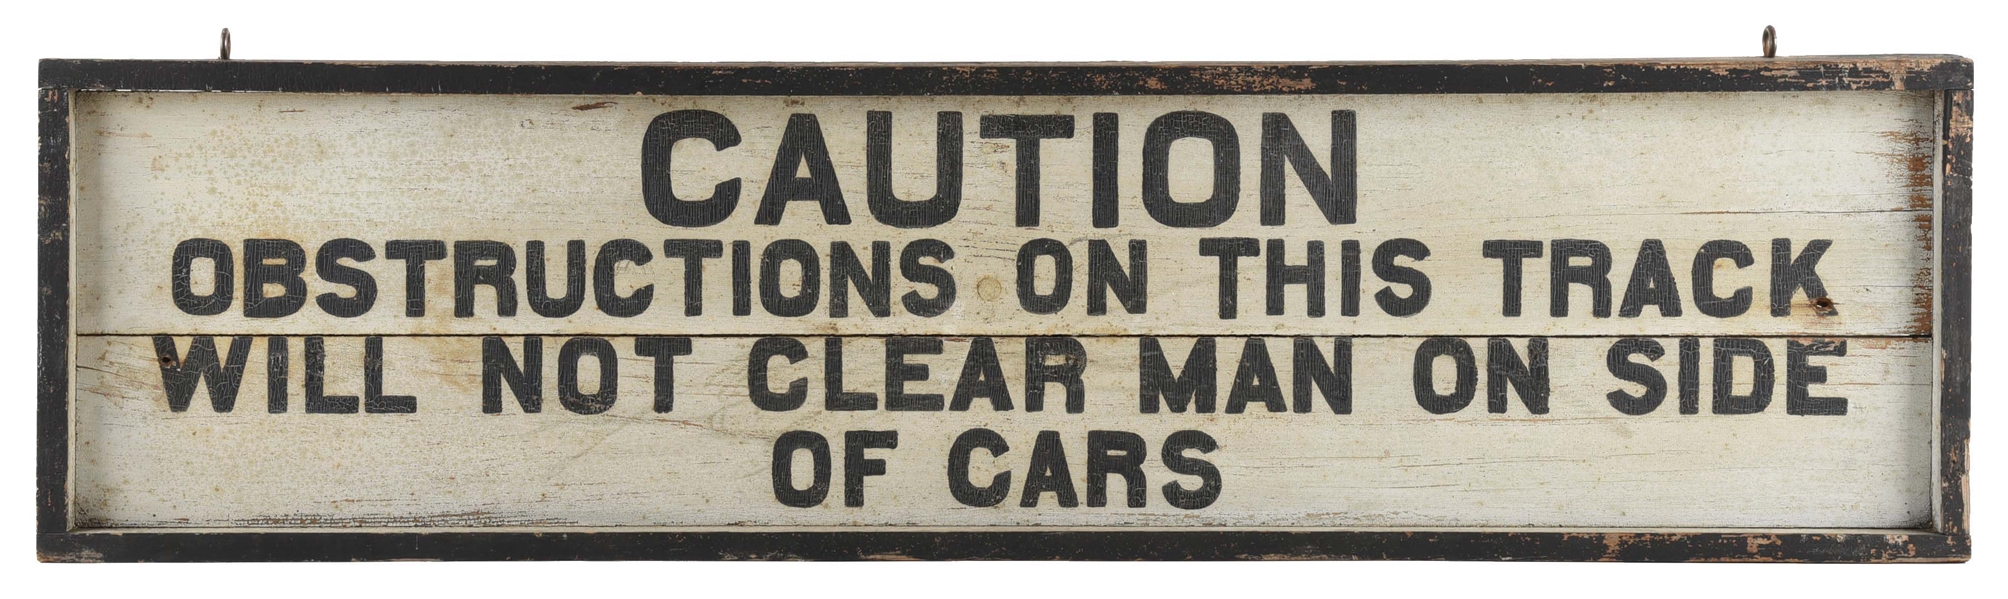 CAUTION TRACK OBSTRUCTIONS HAND PAINTED WOOD SIGN.